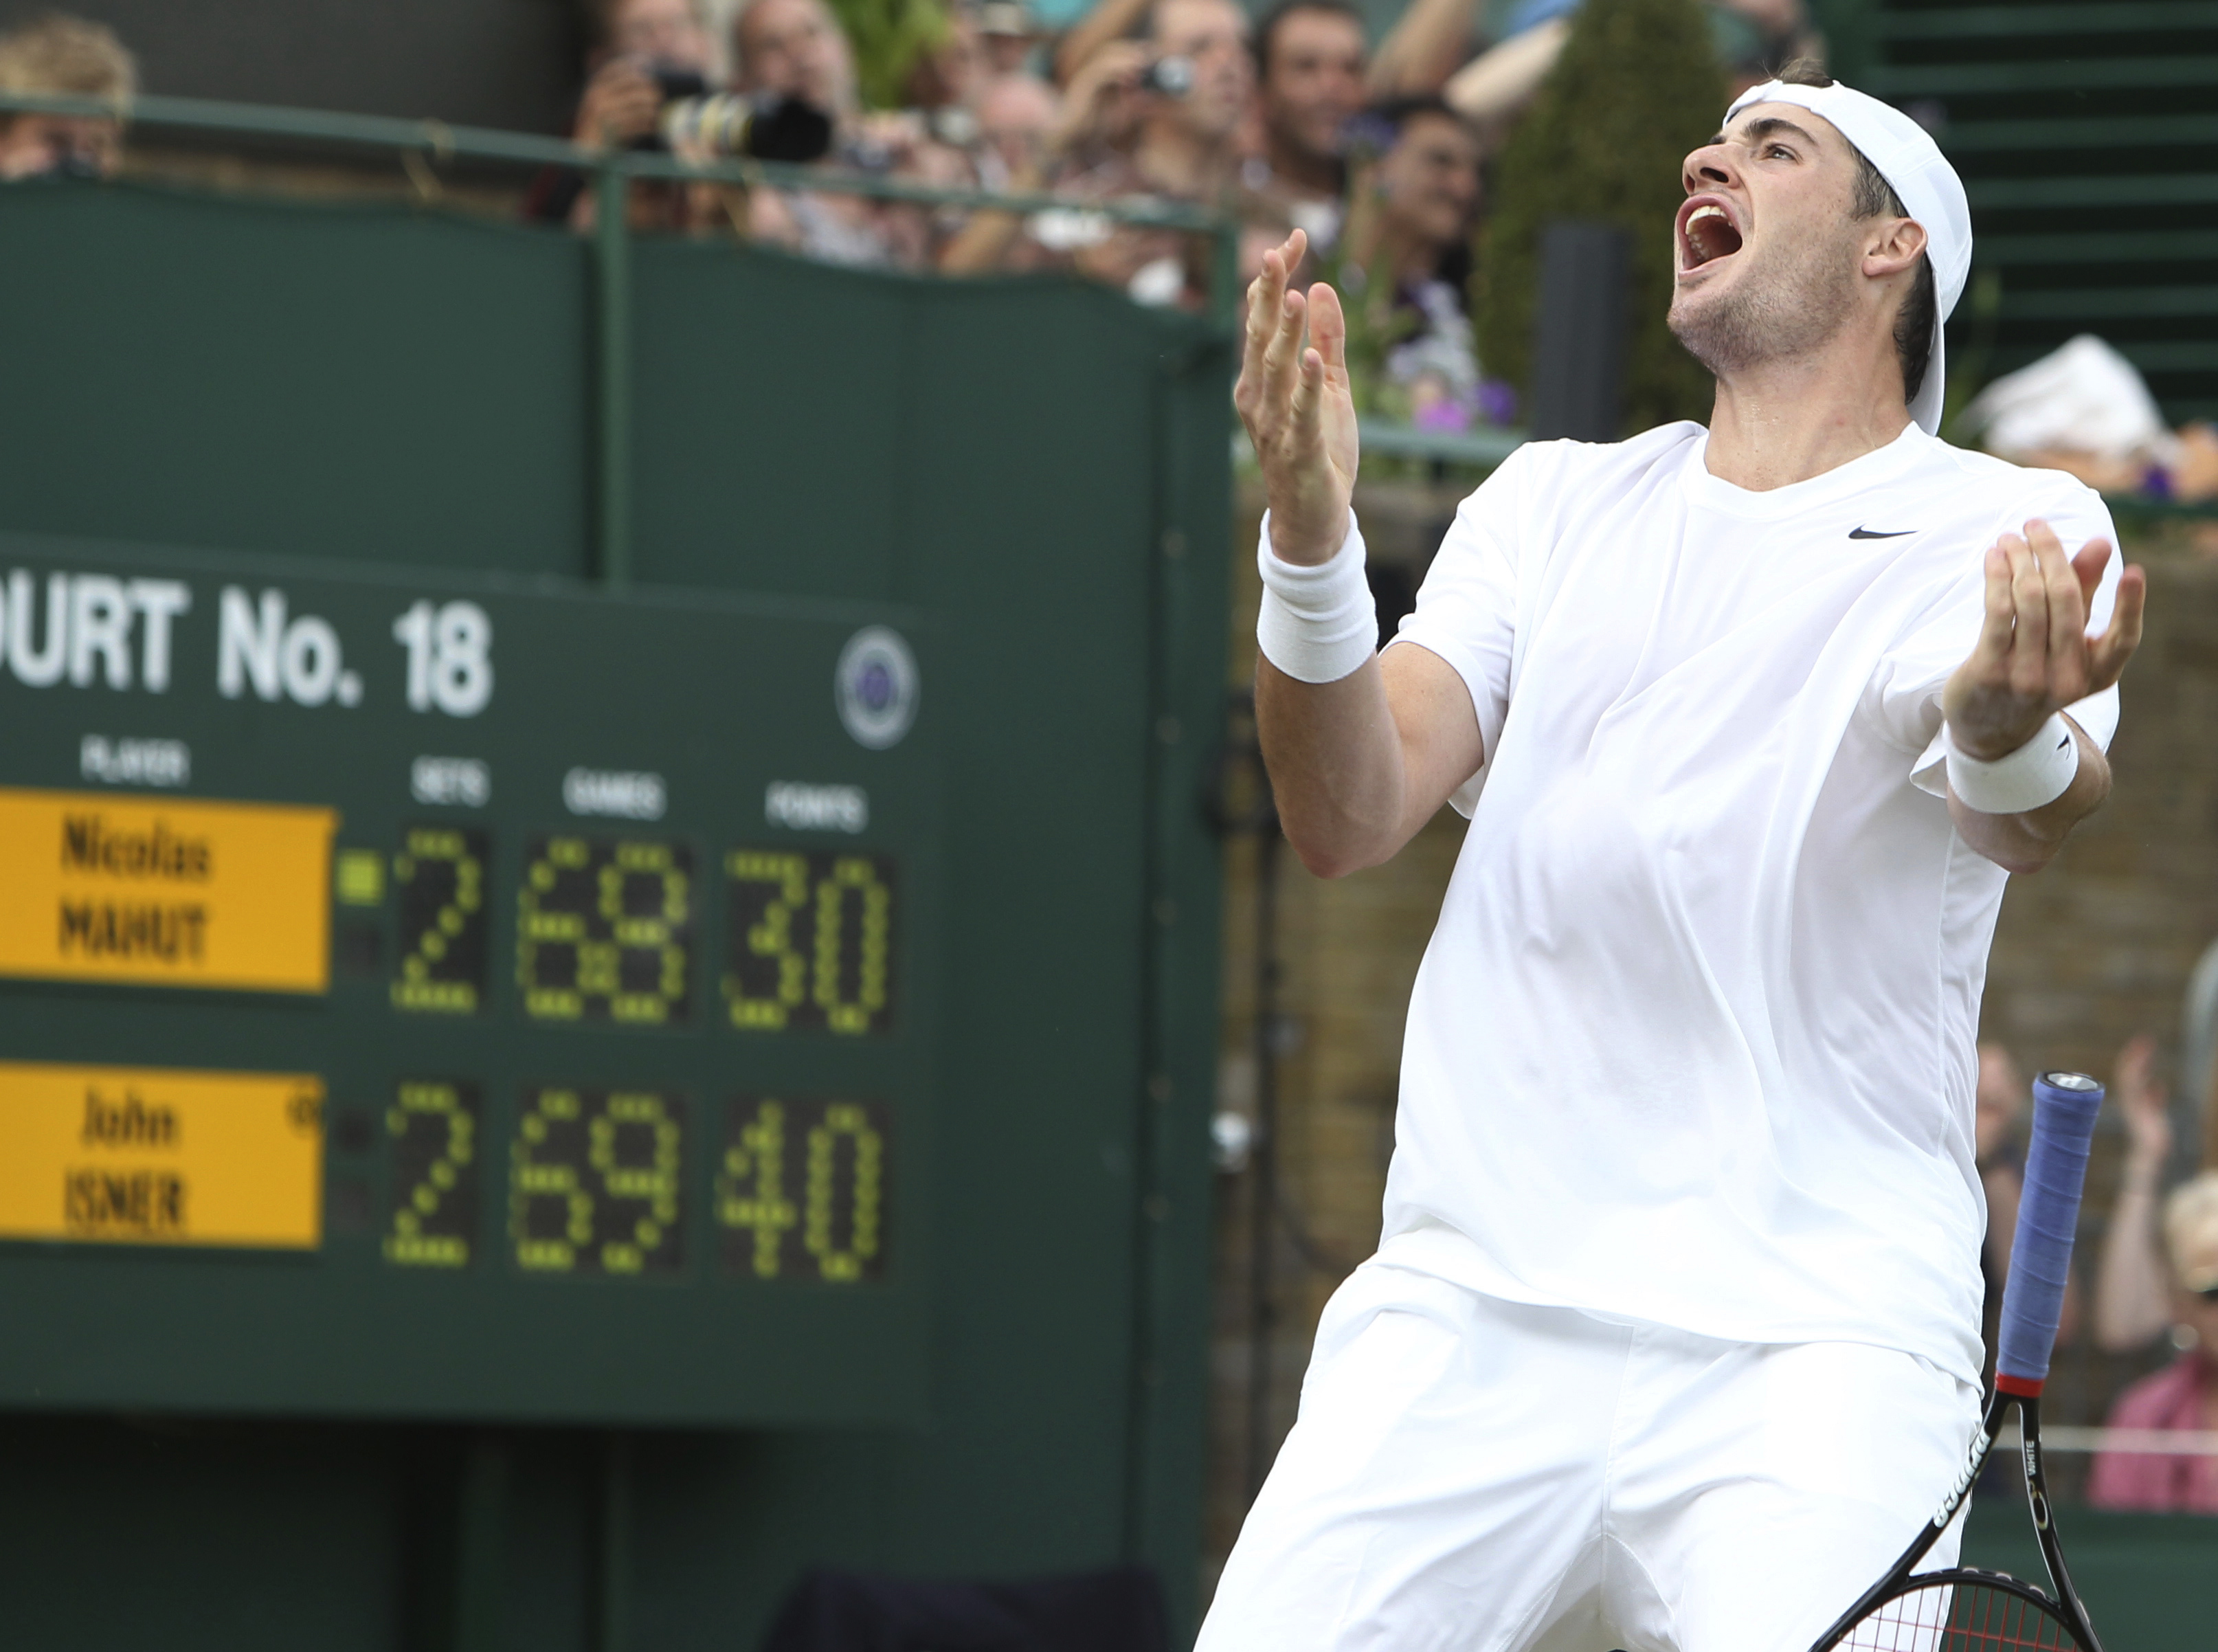 John Isner is retiring from tennis after the US Open